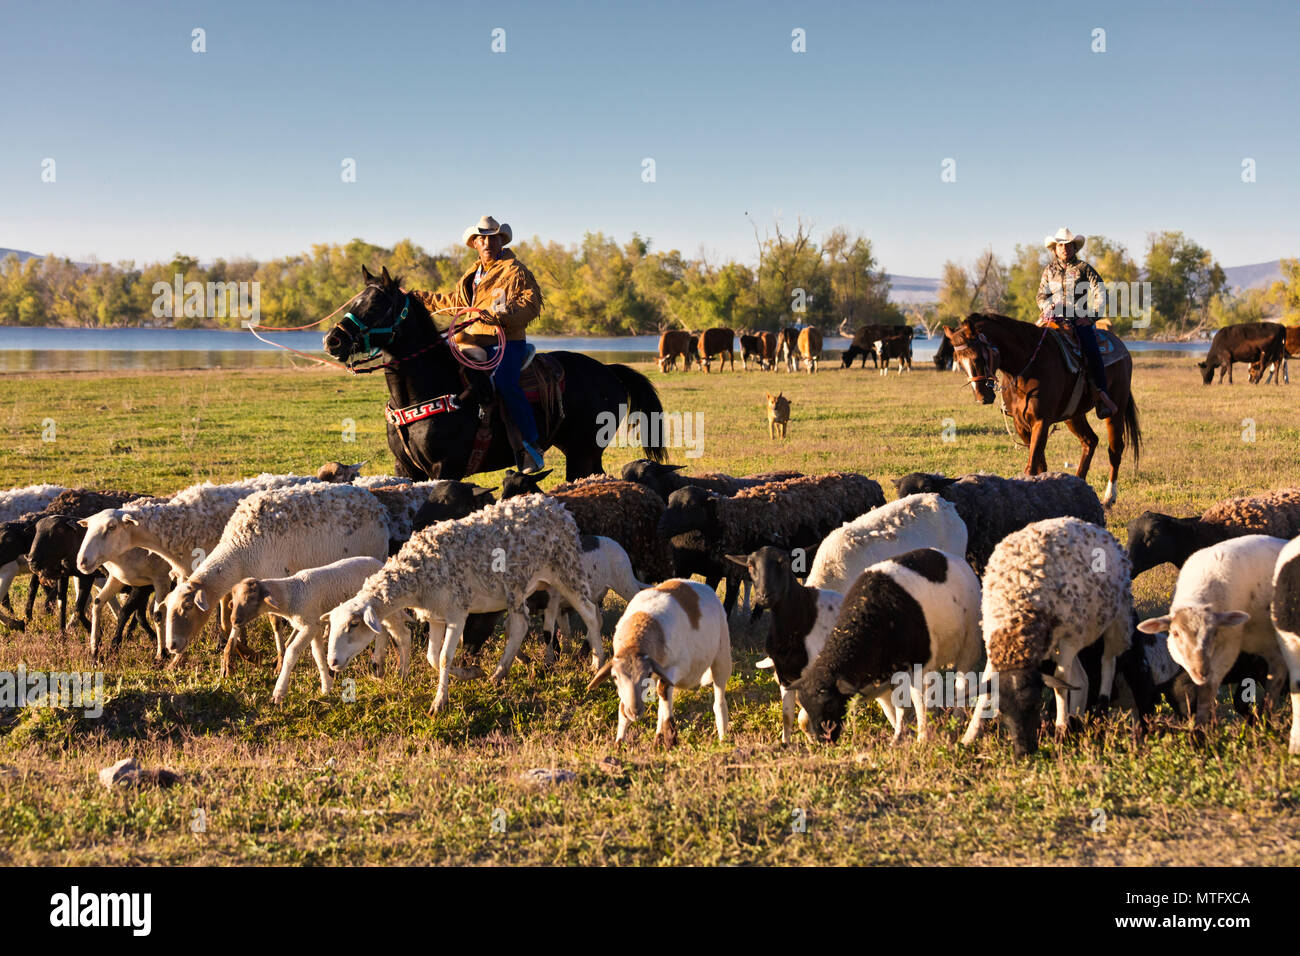 A MEXICAN CABALLERO herds sheep and cattle at day break - SAN MIGUEL DE ALLENDE, MEXICO Stock Photo